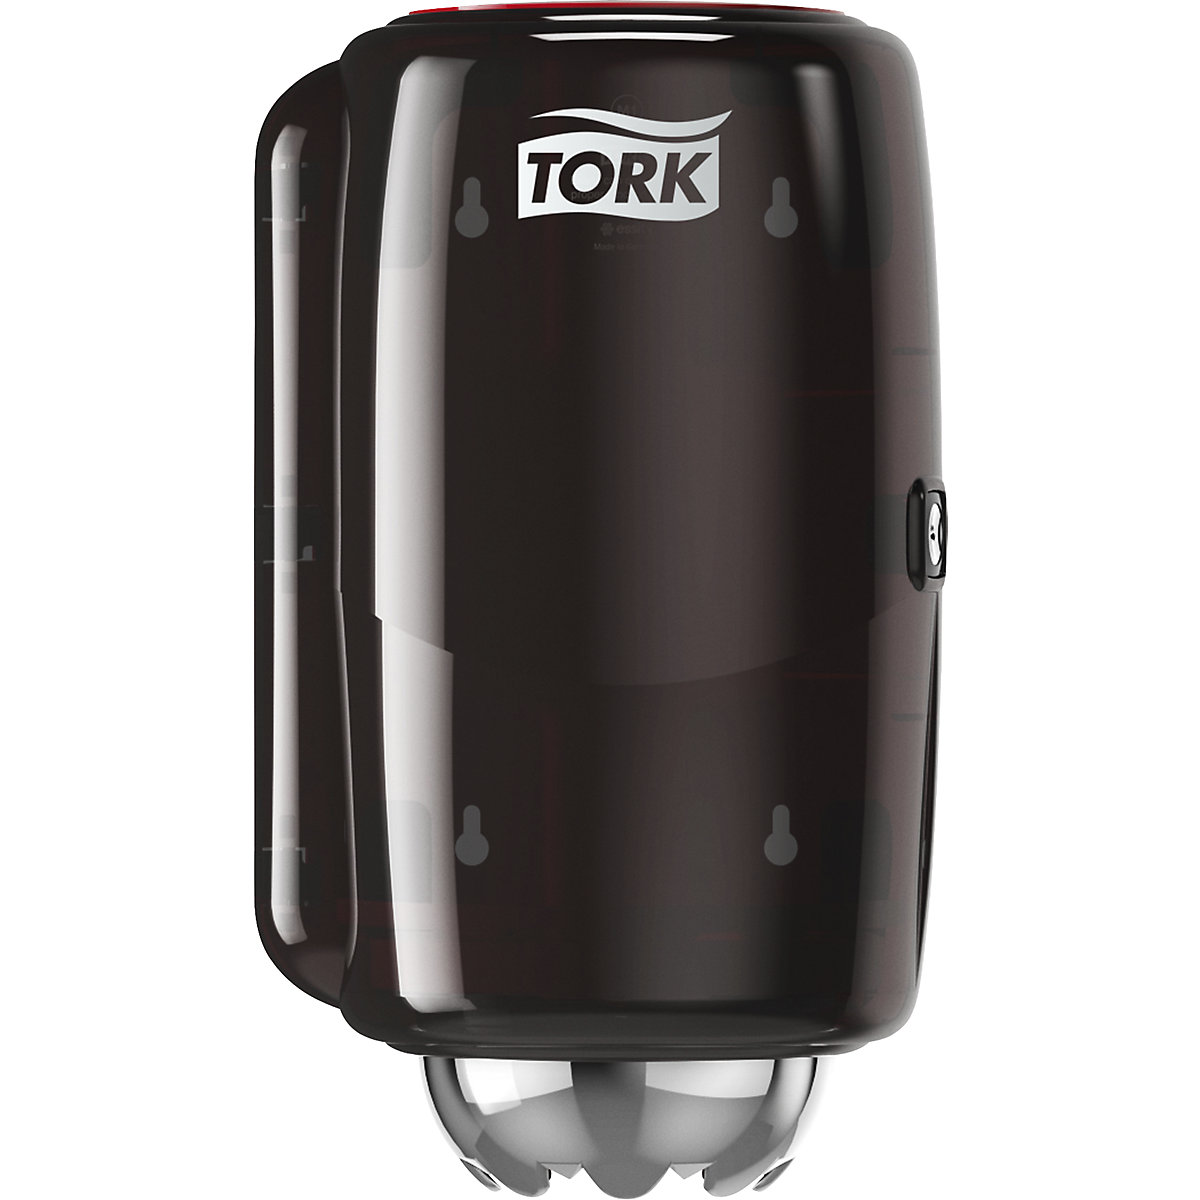 Paper towel and cleaning cloth dispenser - TORK